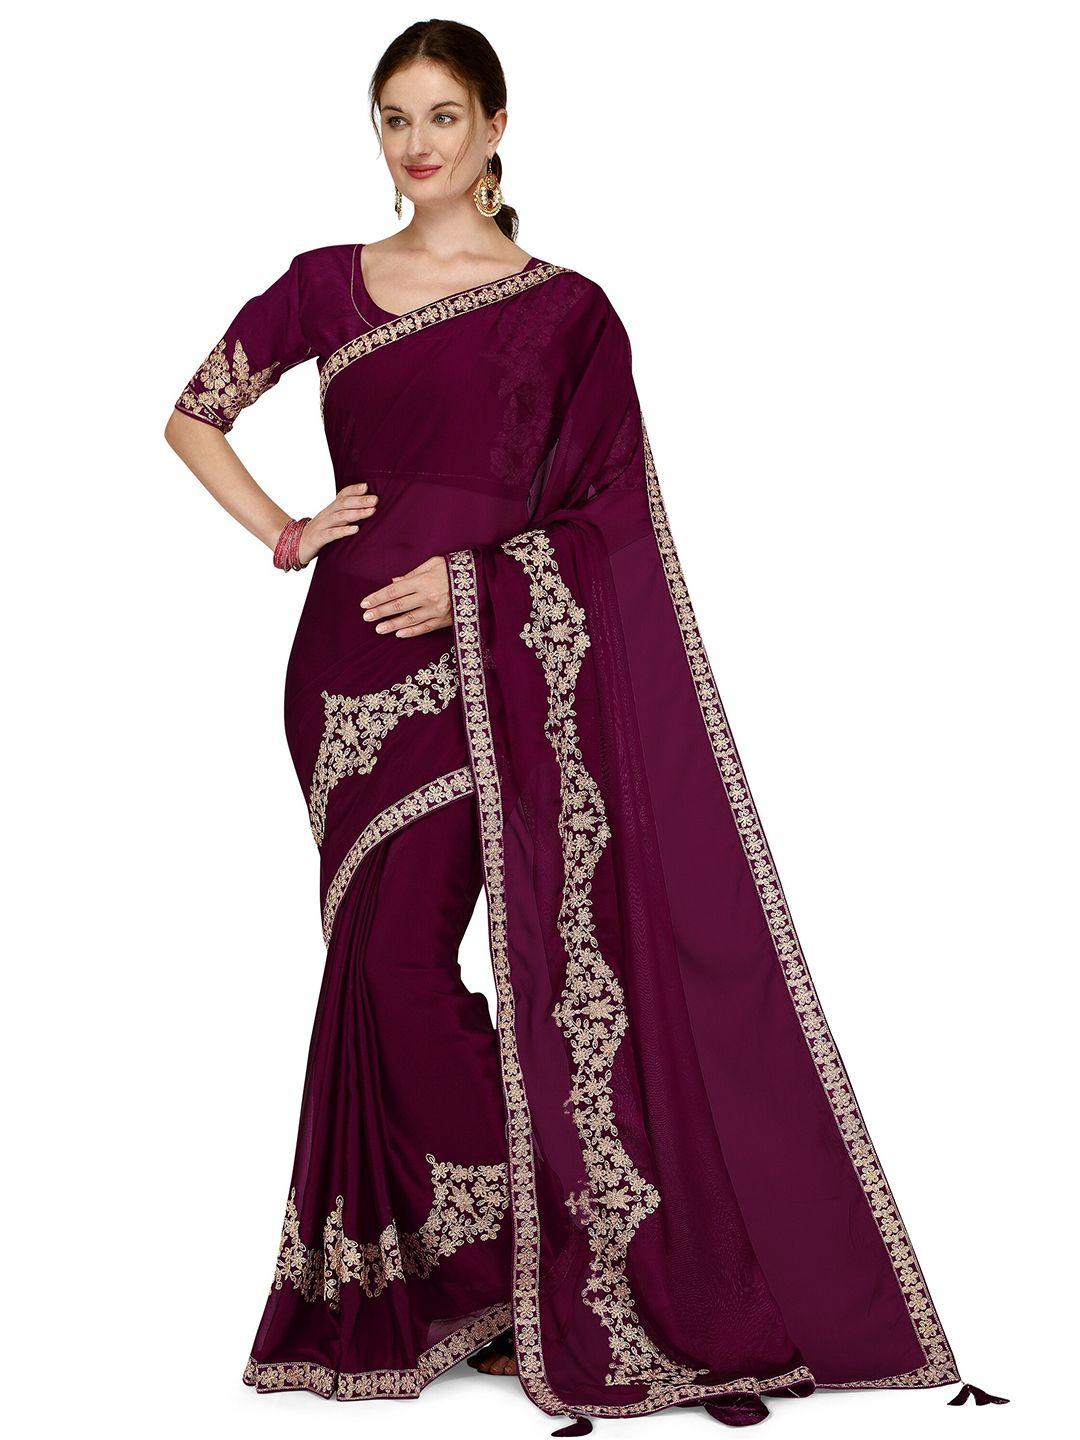 iris purple & gold-toned floral embroidered saree